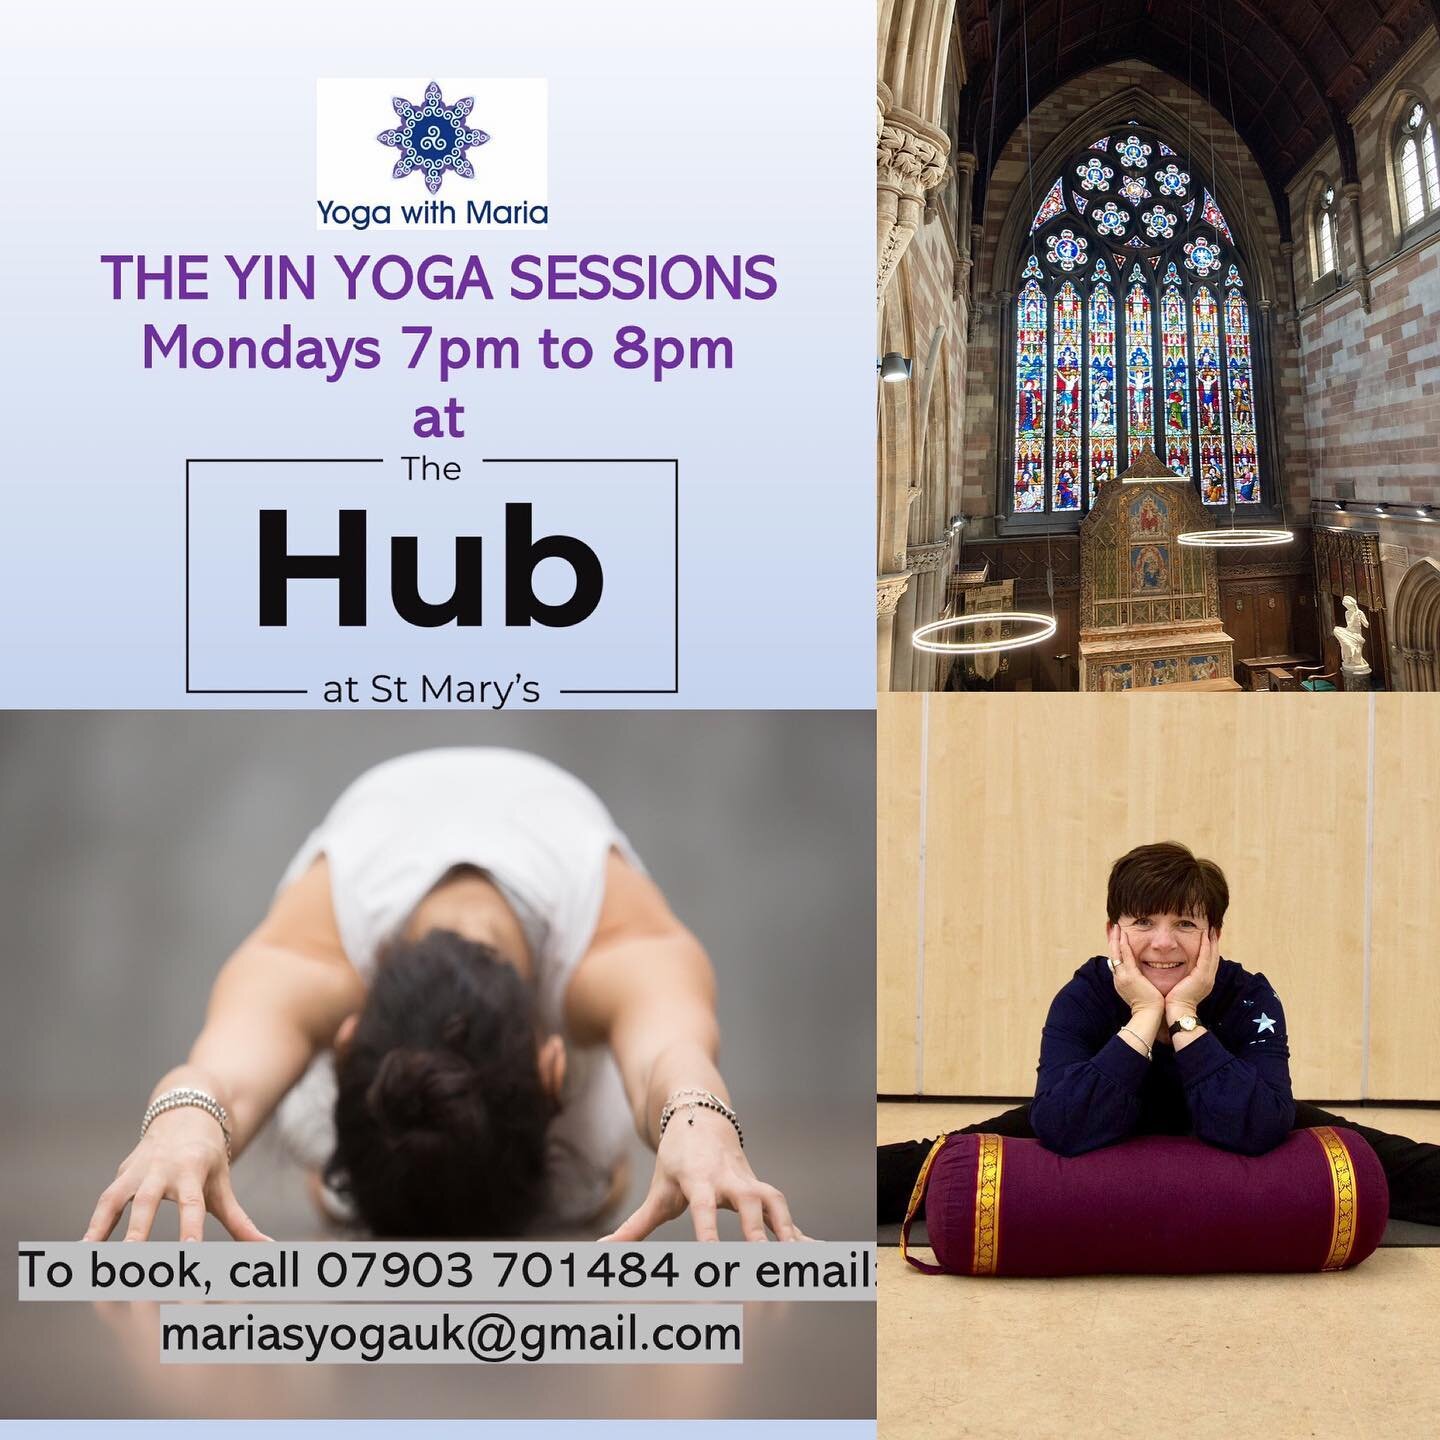 Starting next week, in person Yin yoga sessions every Monday at the stunning venue of @thehubatstmarys 

So grateful to @lichfieldyoga for inviting me to take over these lovely sessions.

If you&rsquo;d like to join us, click on the link in bio and h